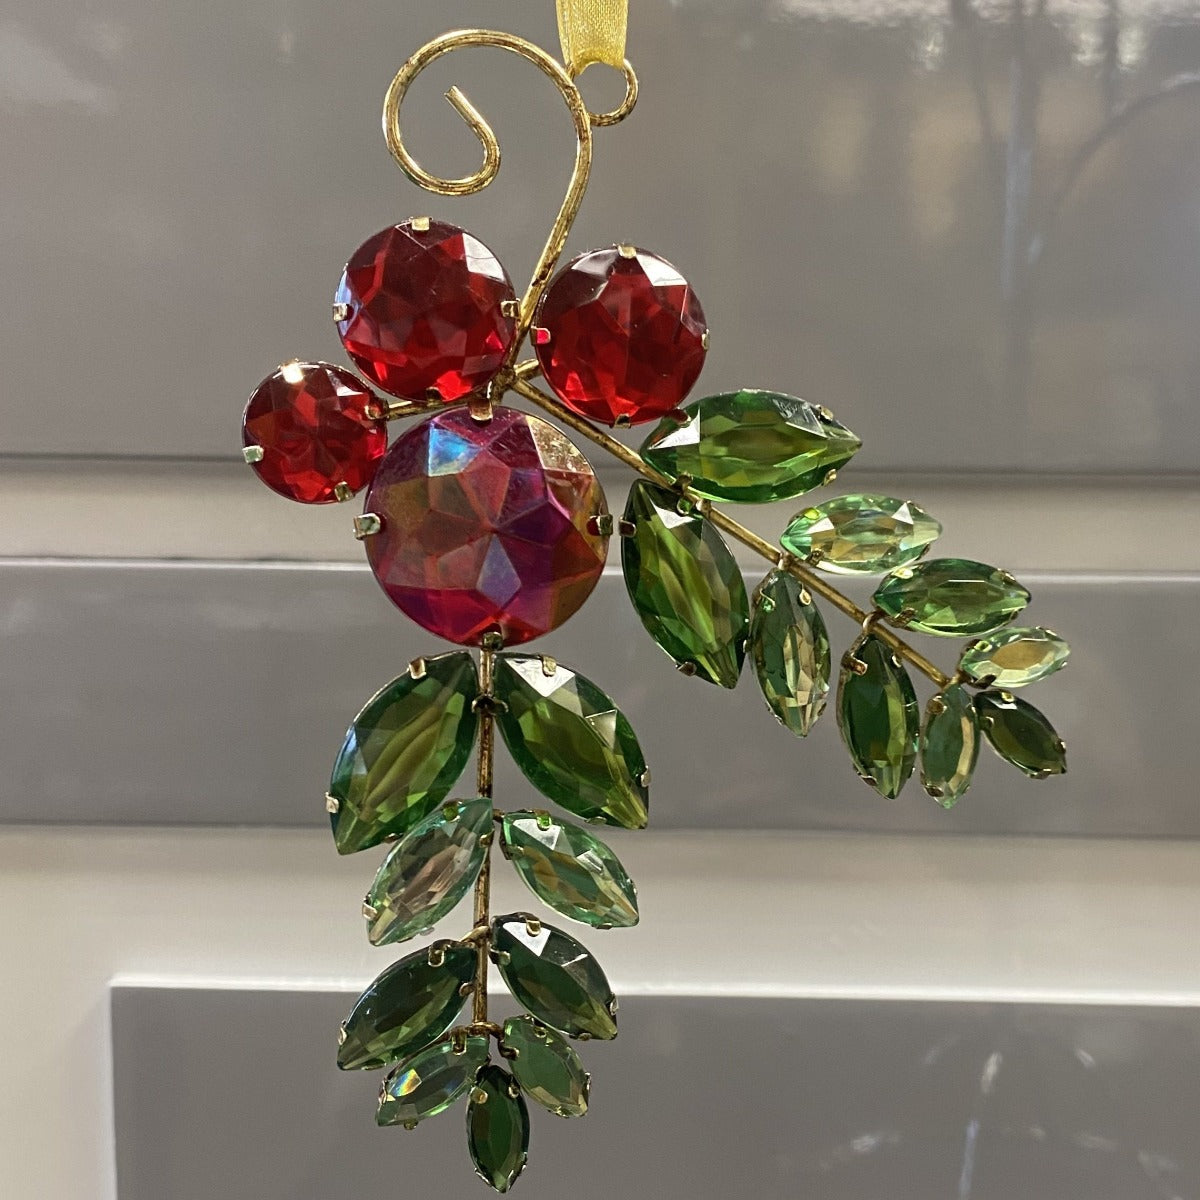 Gisela Graham Glass Jewel Christmas Ornament  This beautifully festive Glass Jewel from Gisela Graham is the perfect way to add a touch of glitter to your tree this Christmas